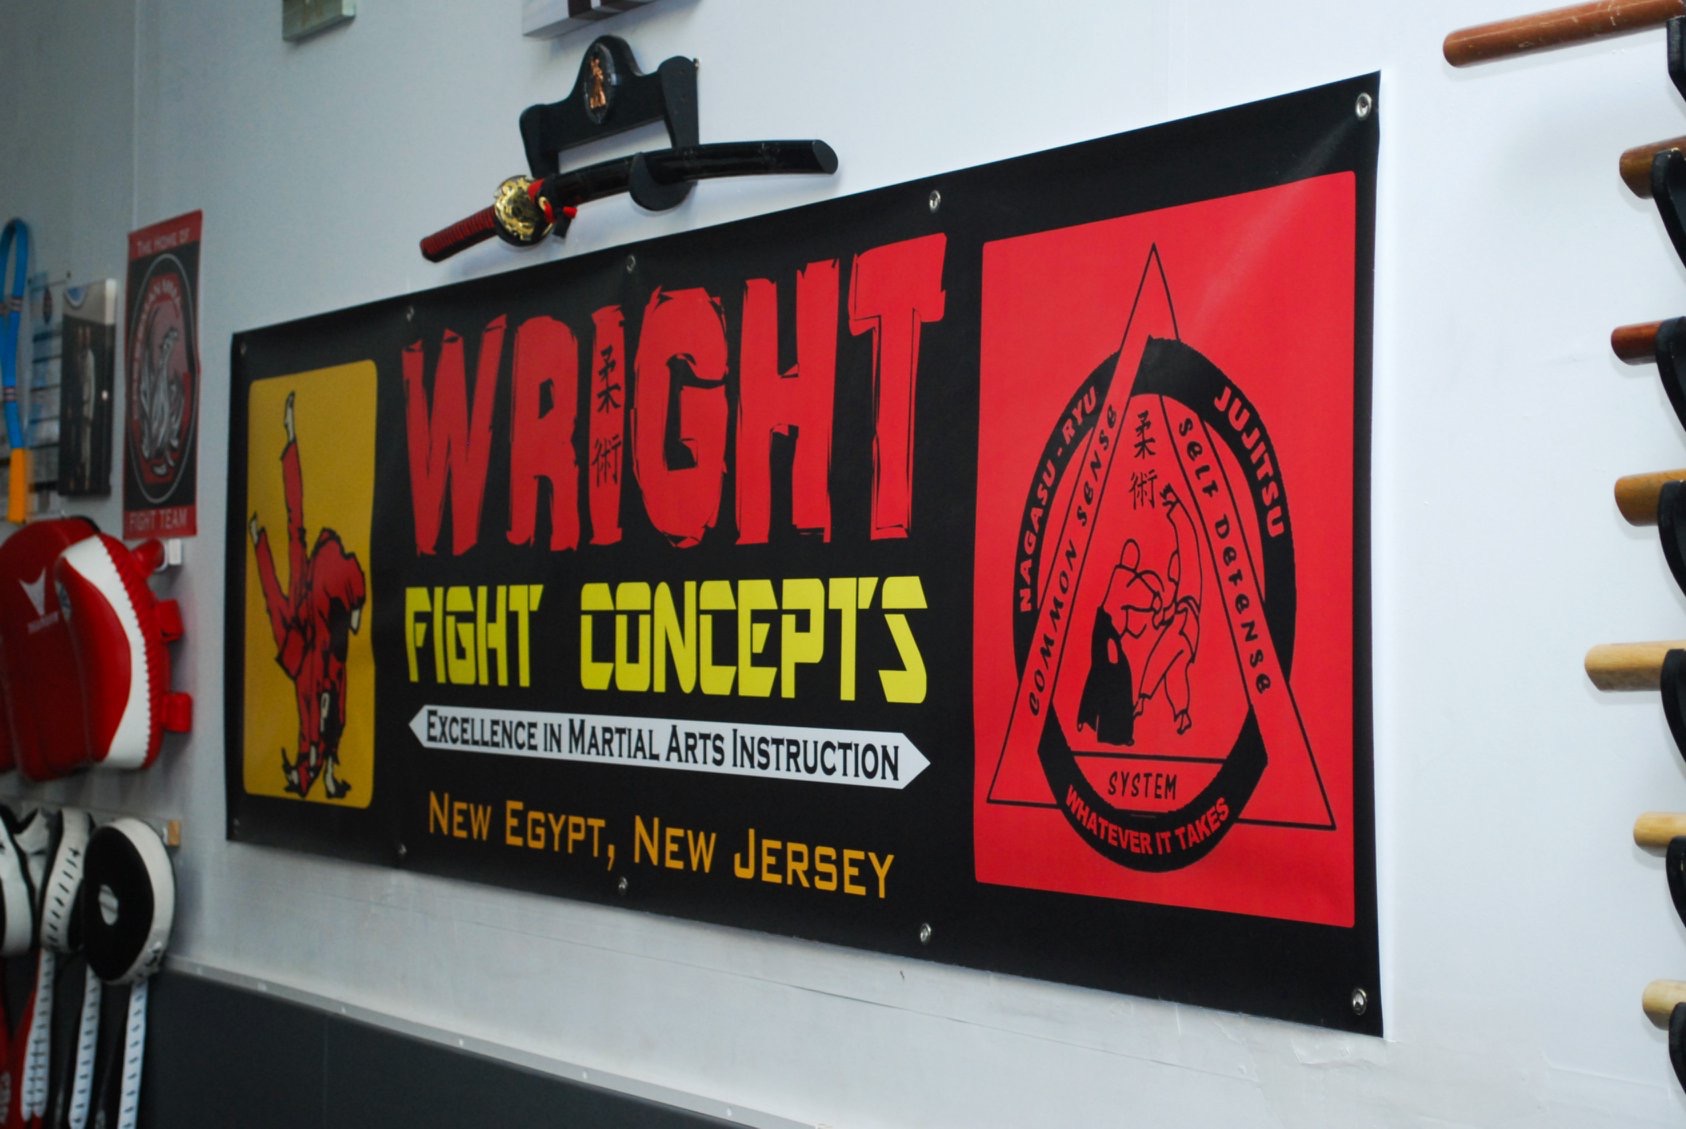 Wright Fight Concepts 126 New Egypt Allentown Rd, New Egypt New Jersey 08533